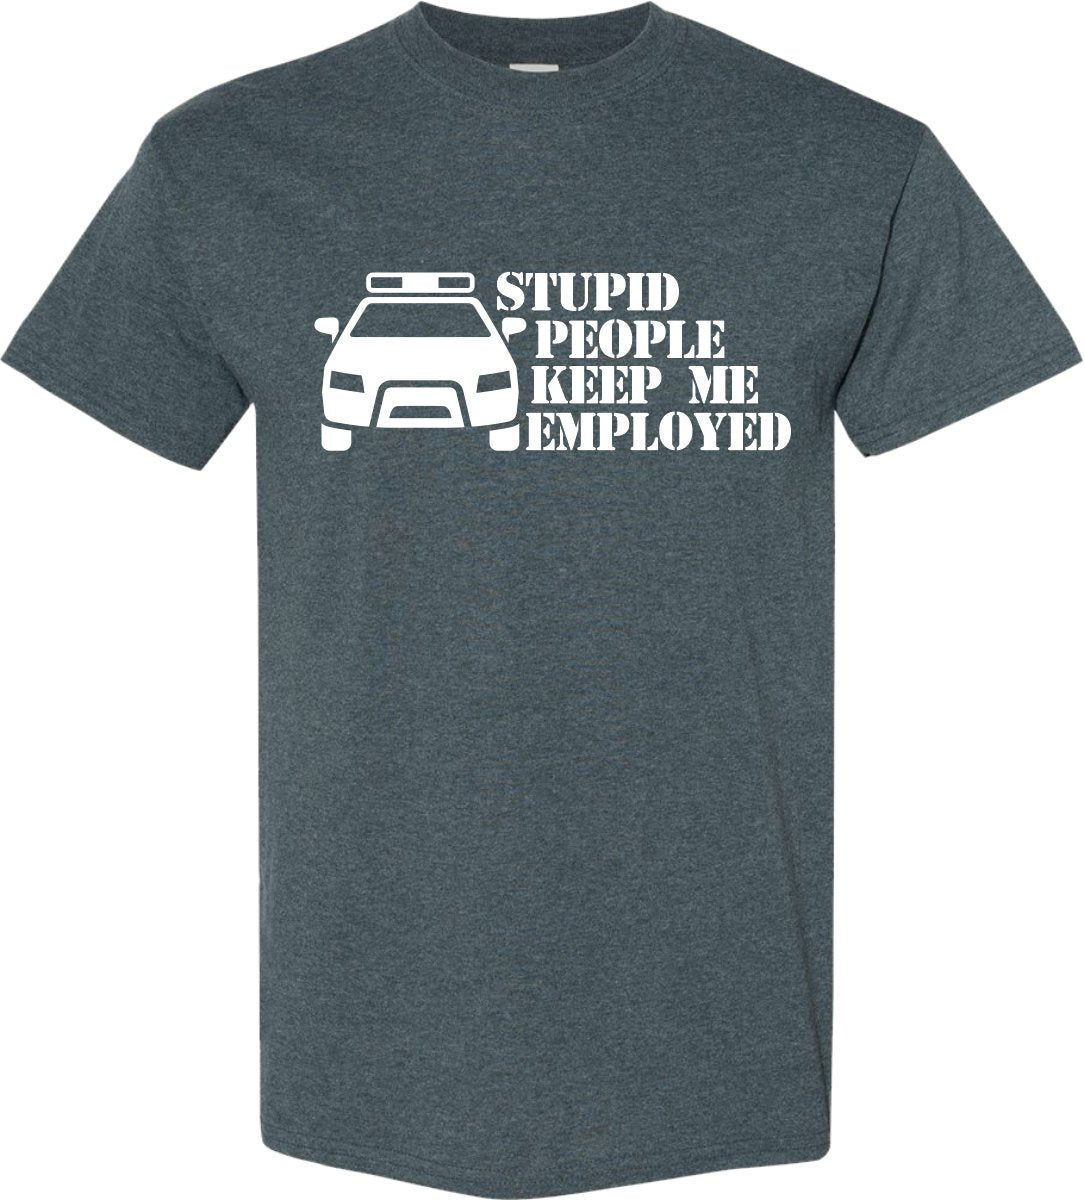 Police T Shirt Stupid People Keep Me Employed ** - SBS T Shop